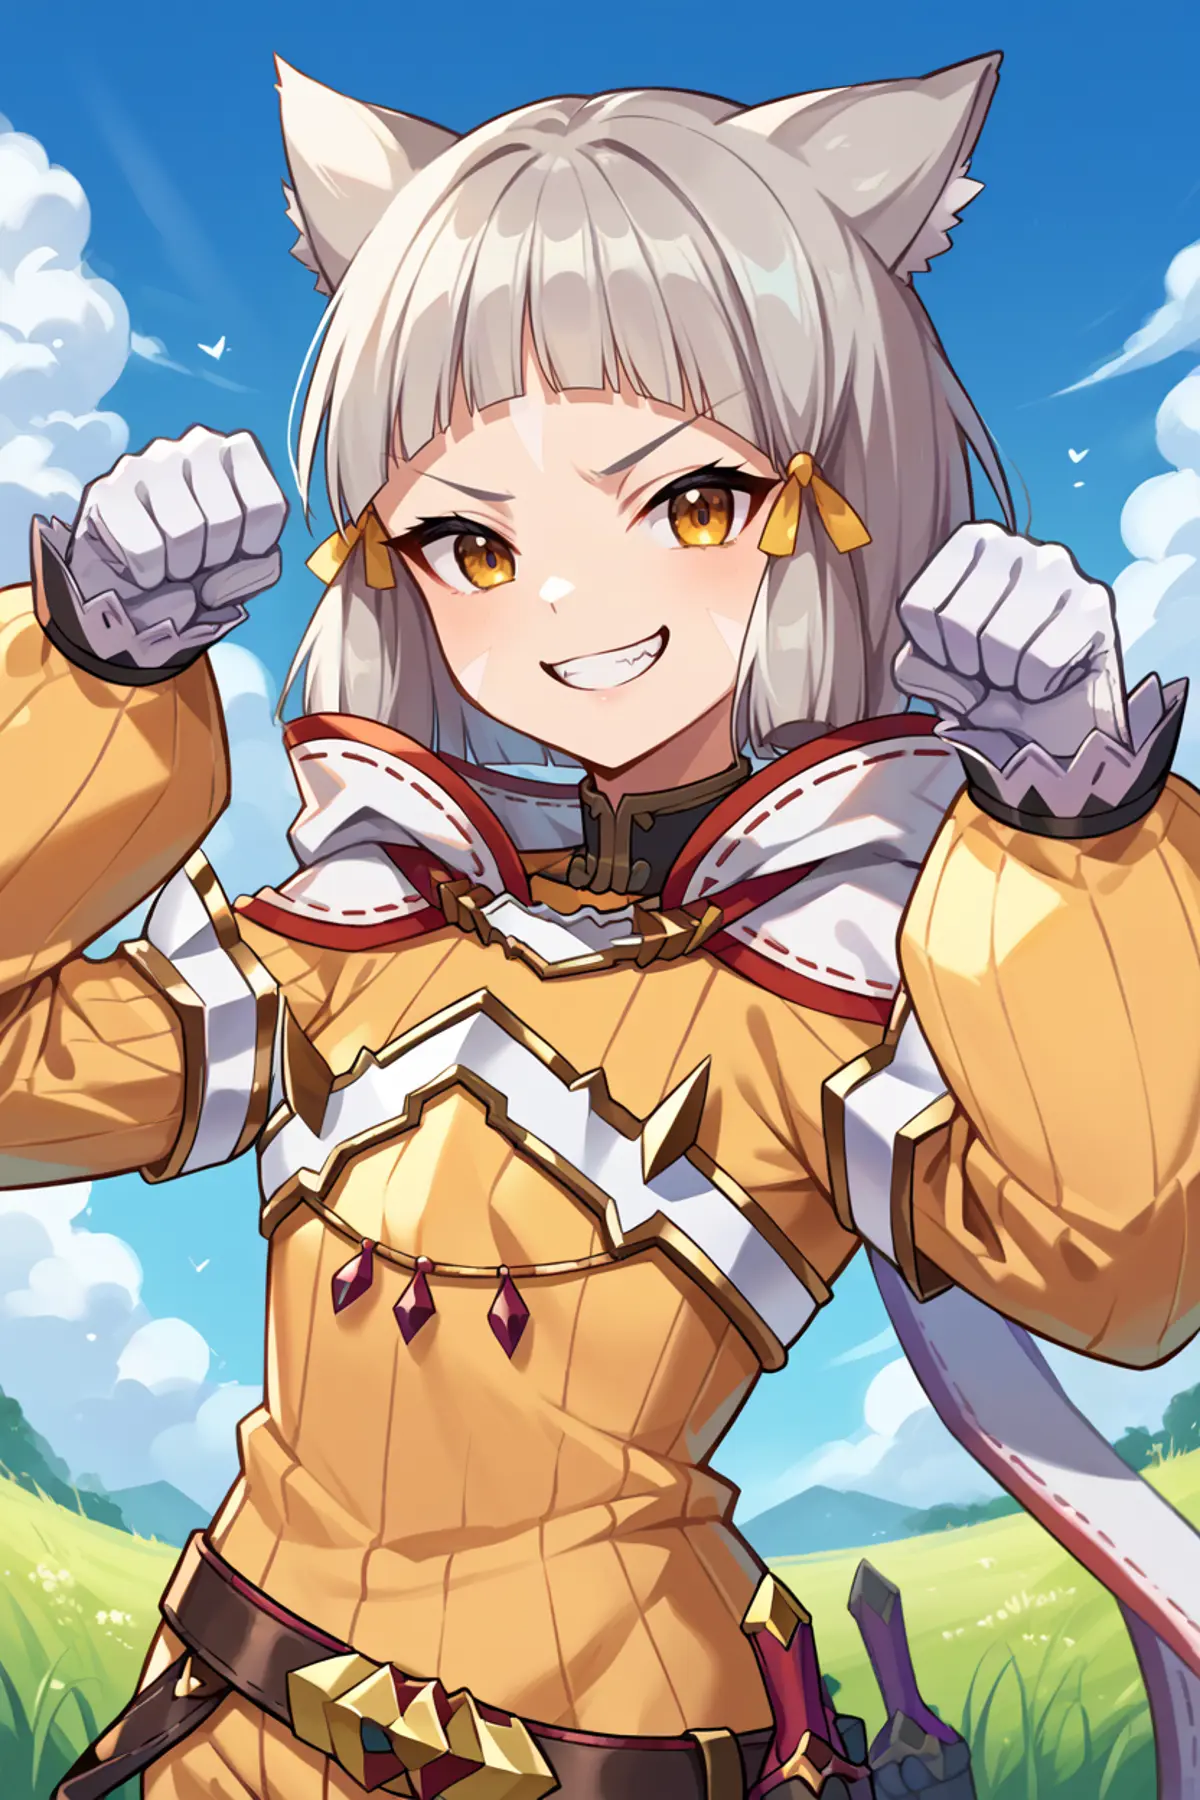 A young woman with cat-like ears standing in a grassy field under a clear blue sky with a few clouds. She is smiling and posing, showing a confident and playful demeanor. She is wearing a yellow outfit adorned with gold and red accents, with a white and red cape. 